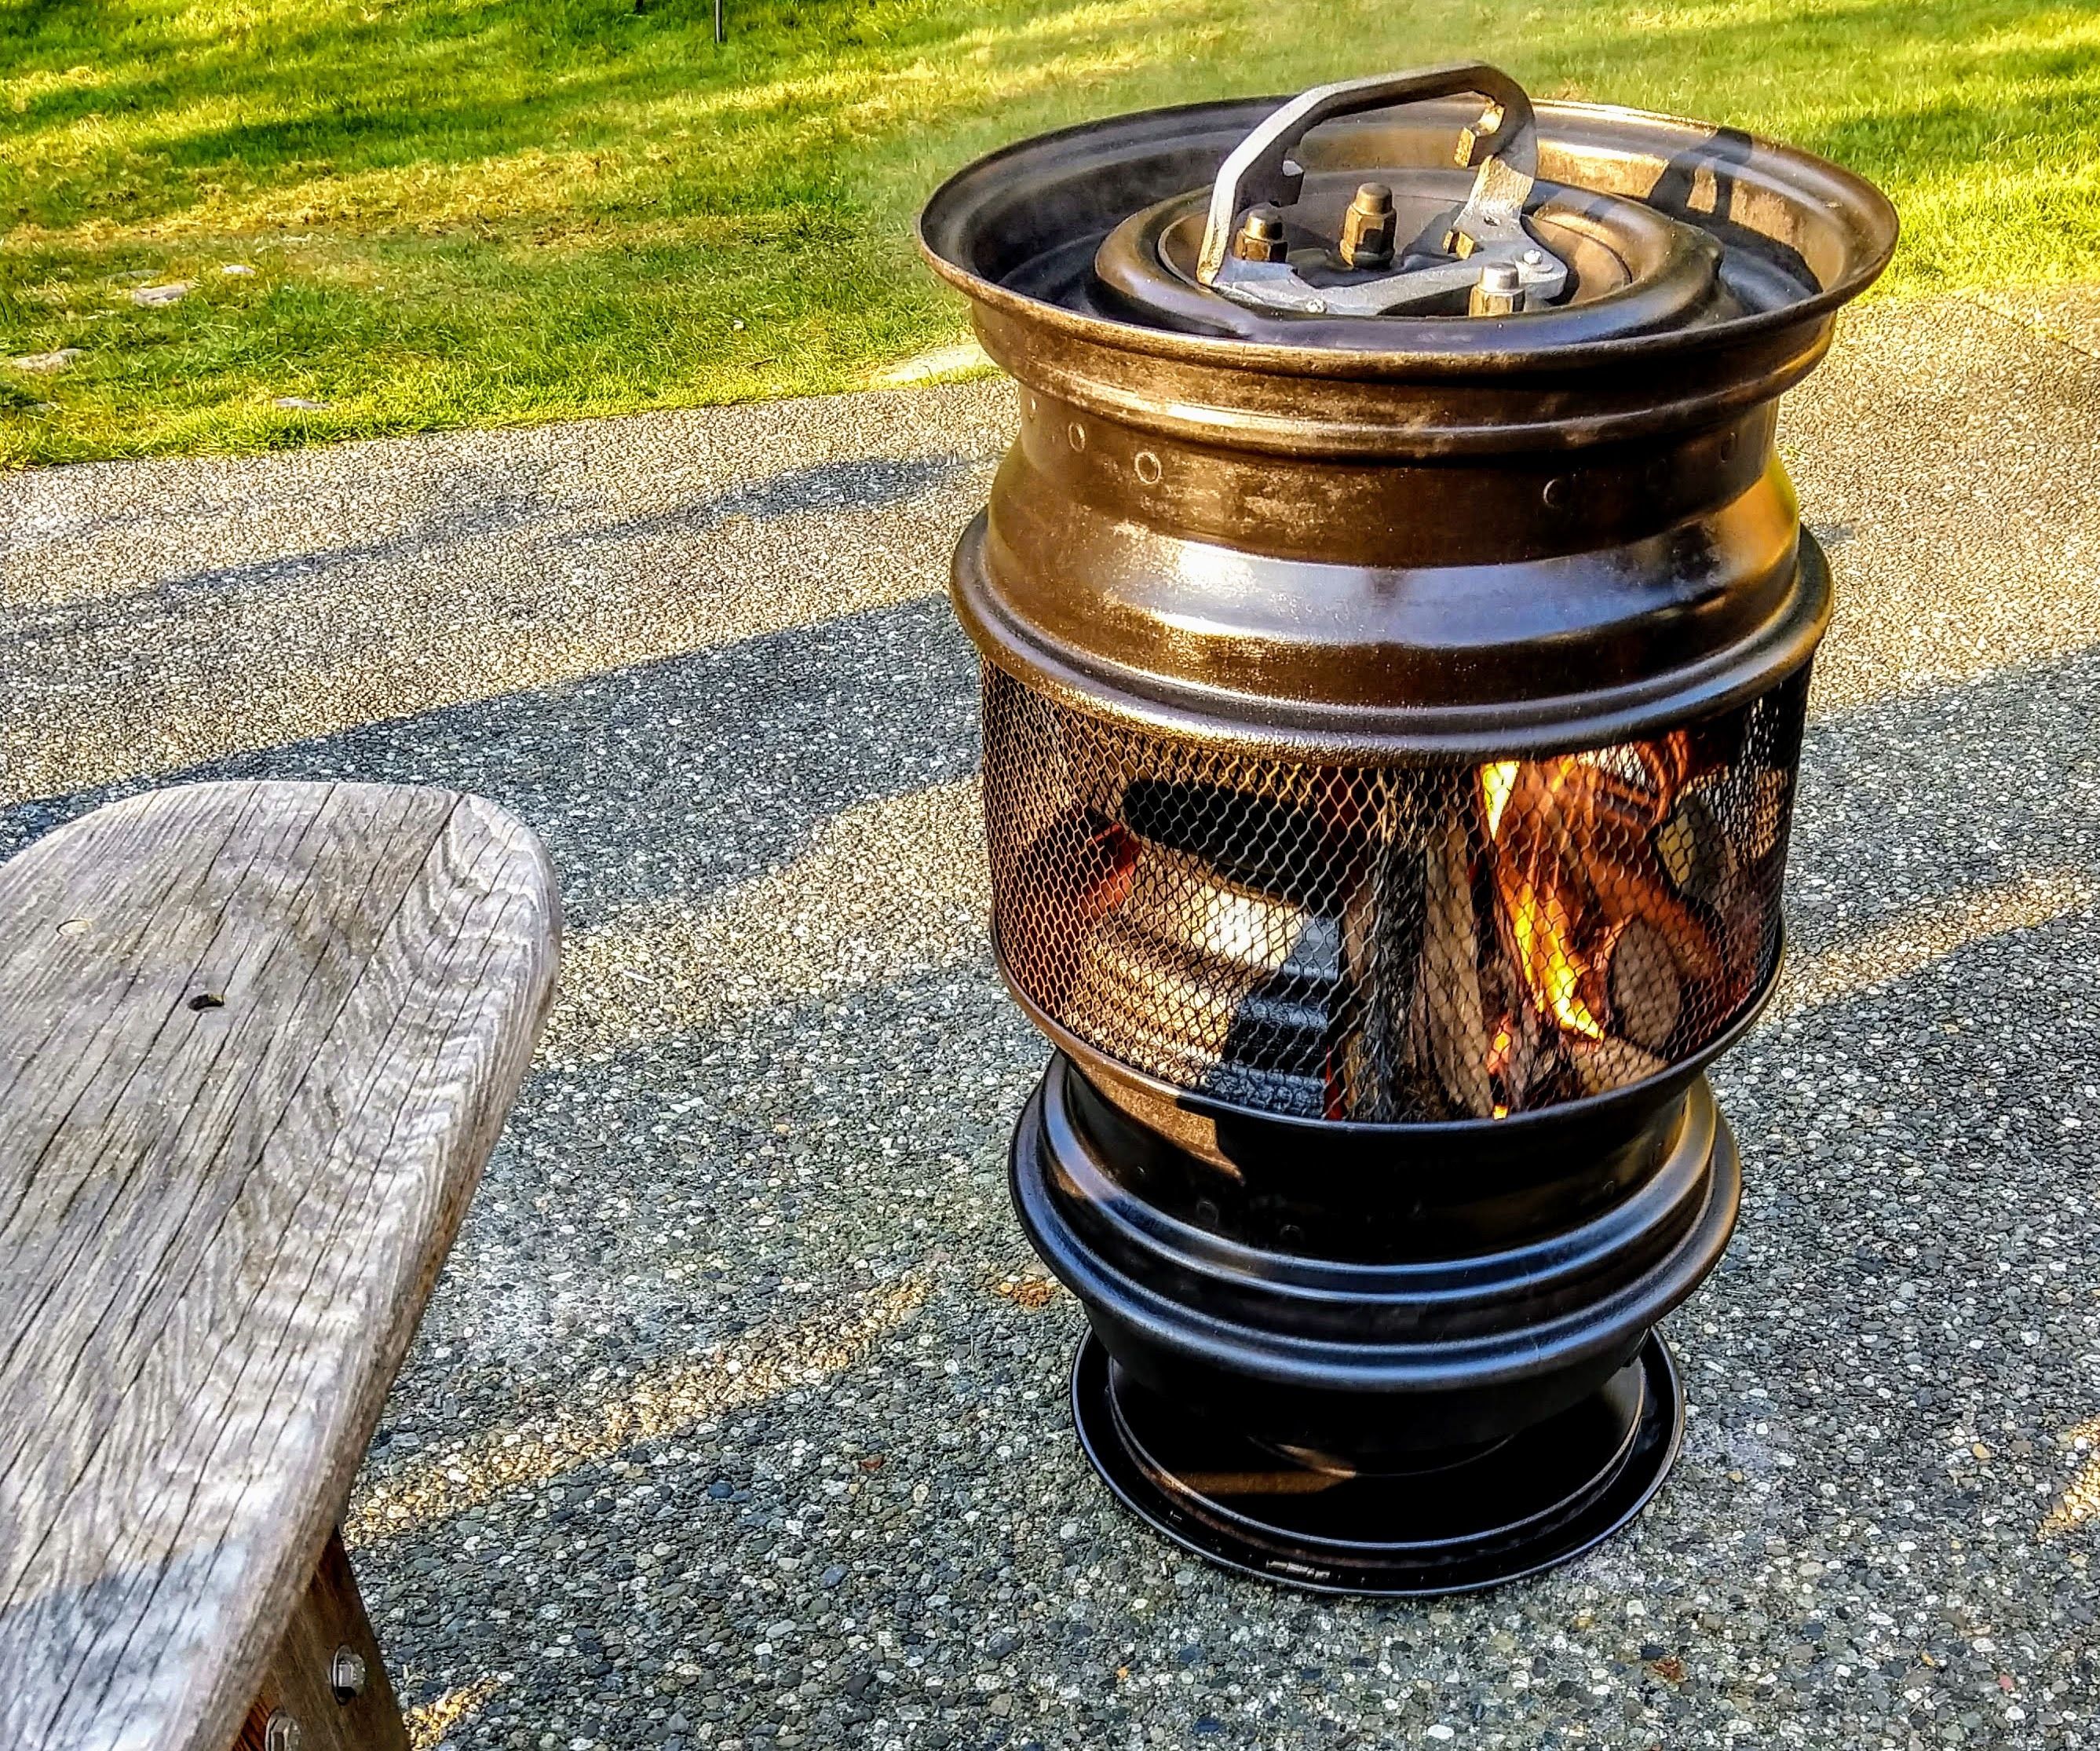 Upcycle Old Steel Wheels Into a Fire Pit